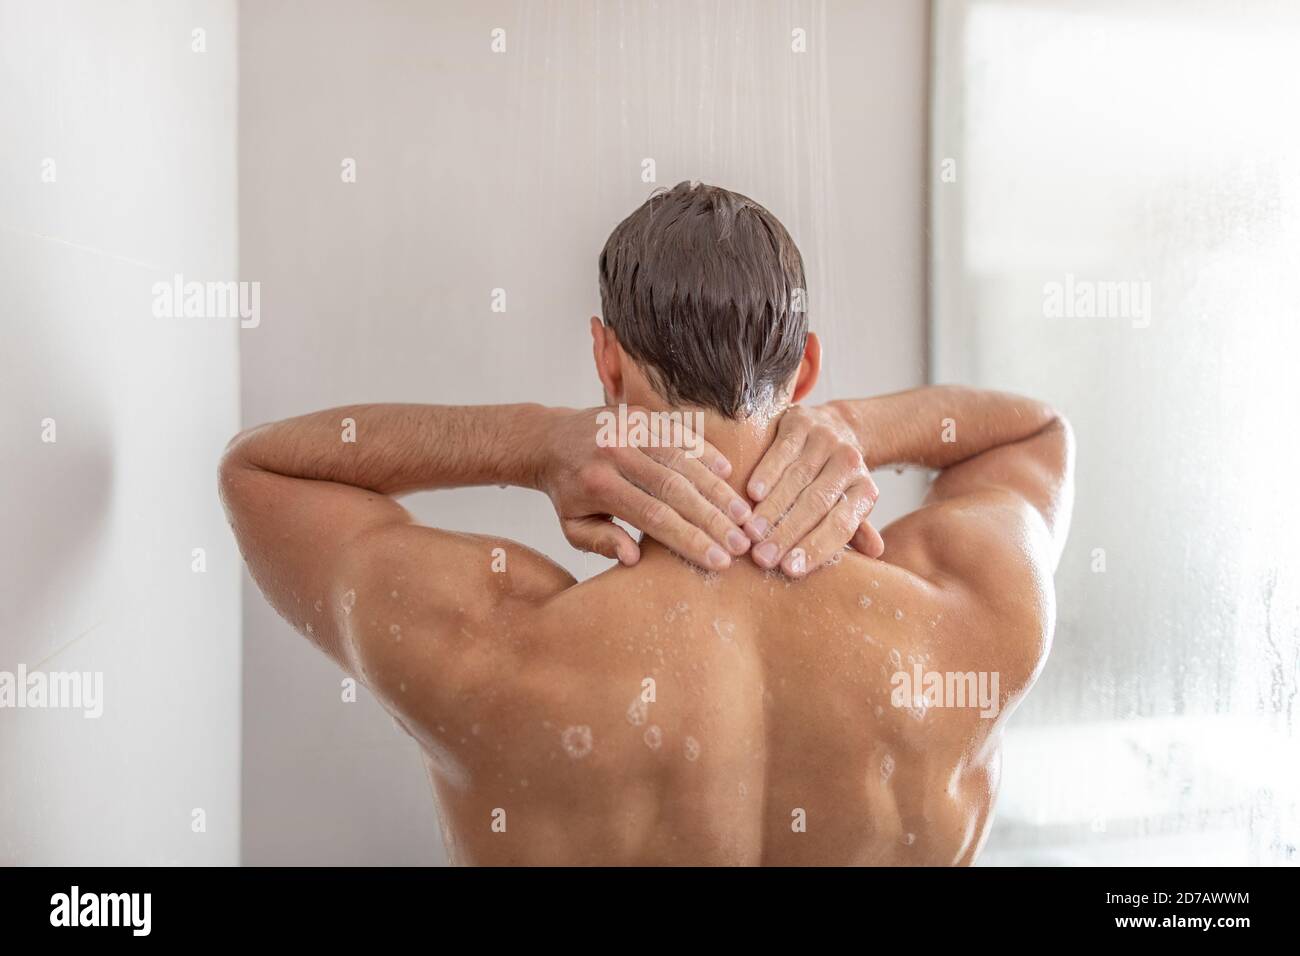 Man taking a shower washing hair under in luxury walk-in hot tub bath. Showering young person touching back of neck at home. Body care male beauty Stock Photo